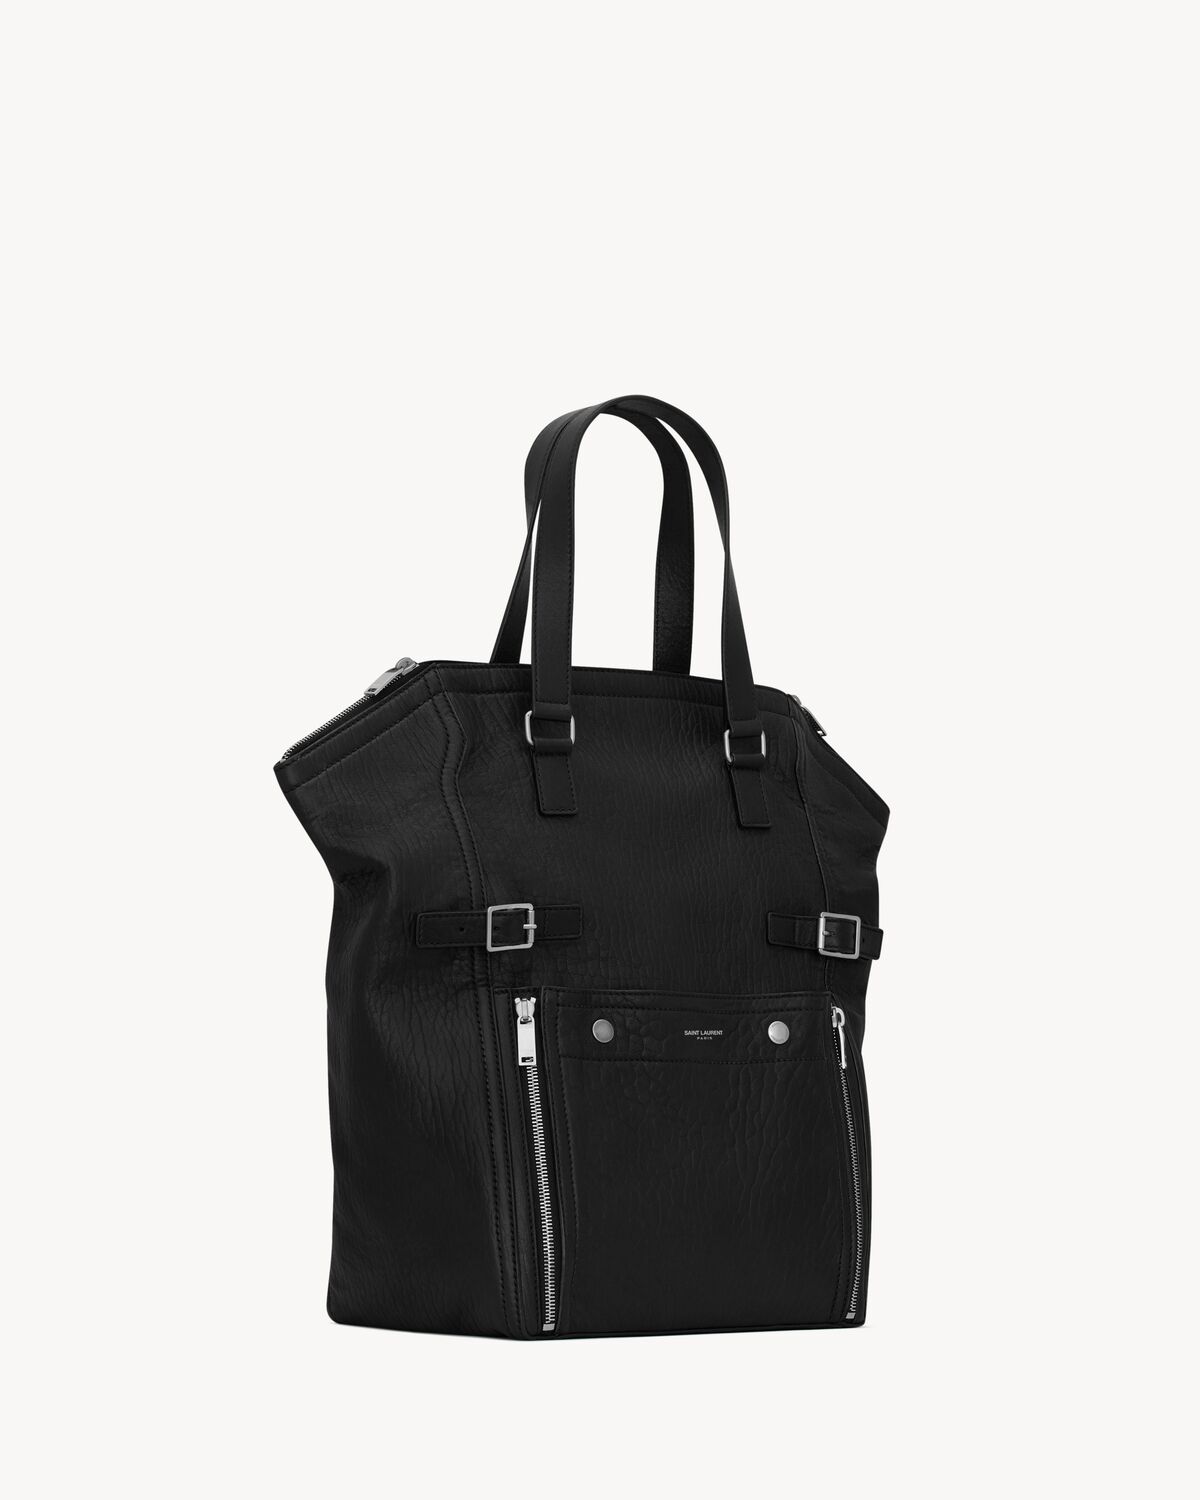 DOWNTOWN tote bag in lambskin leather